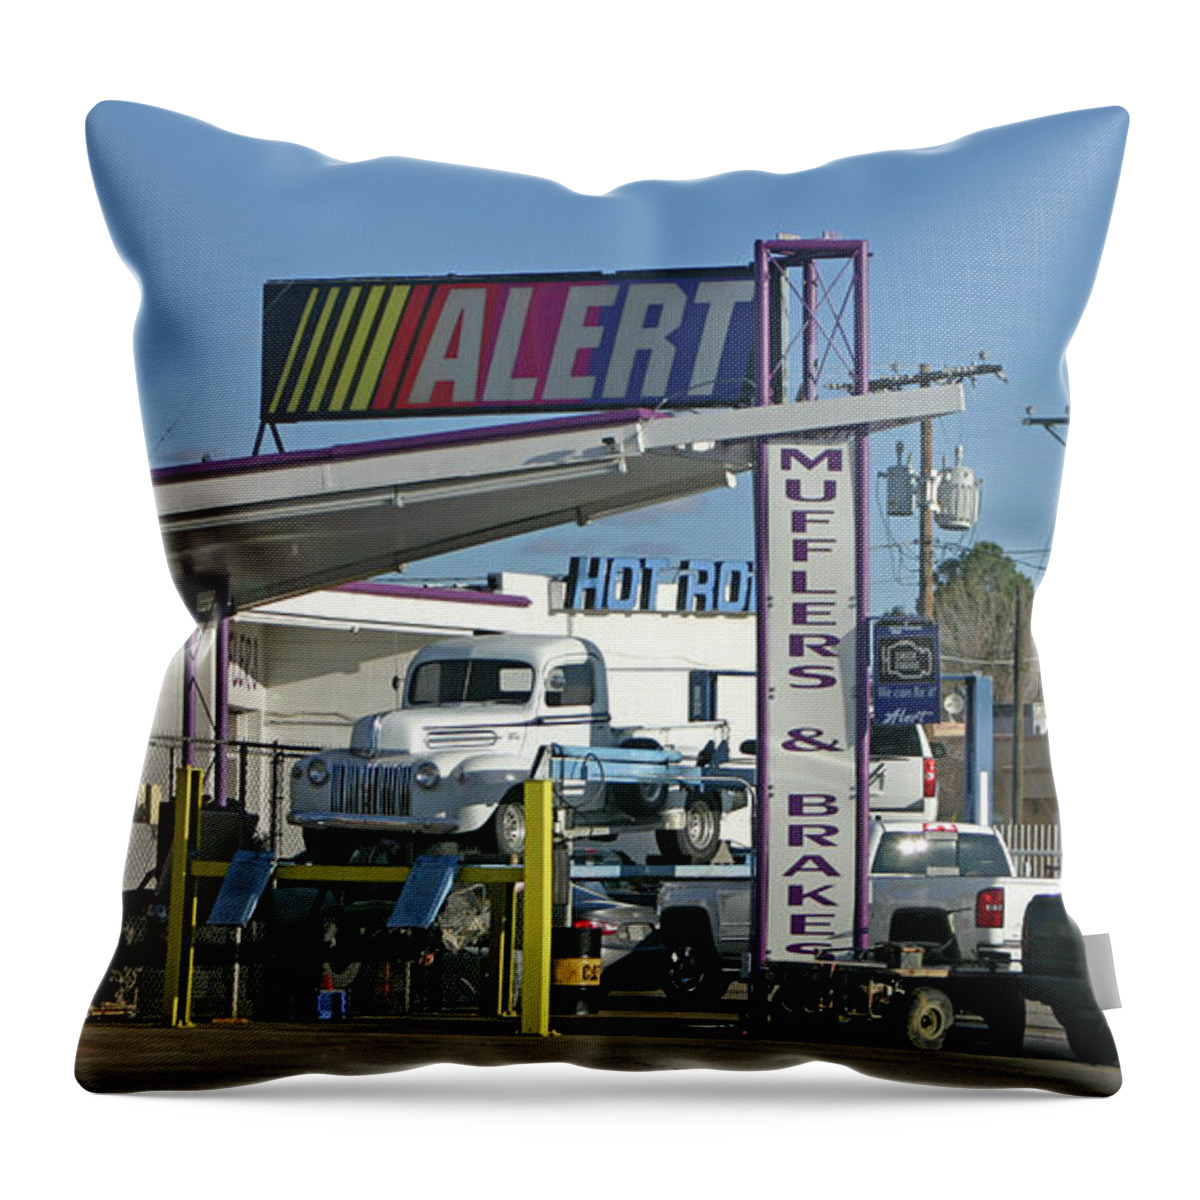 Classic Ford Pick Ups Throw Pillow featuring the photograph Big Boy Toy Repair by Jack Pumphrey